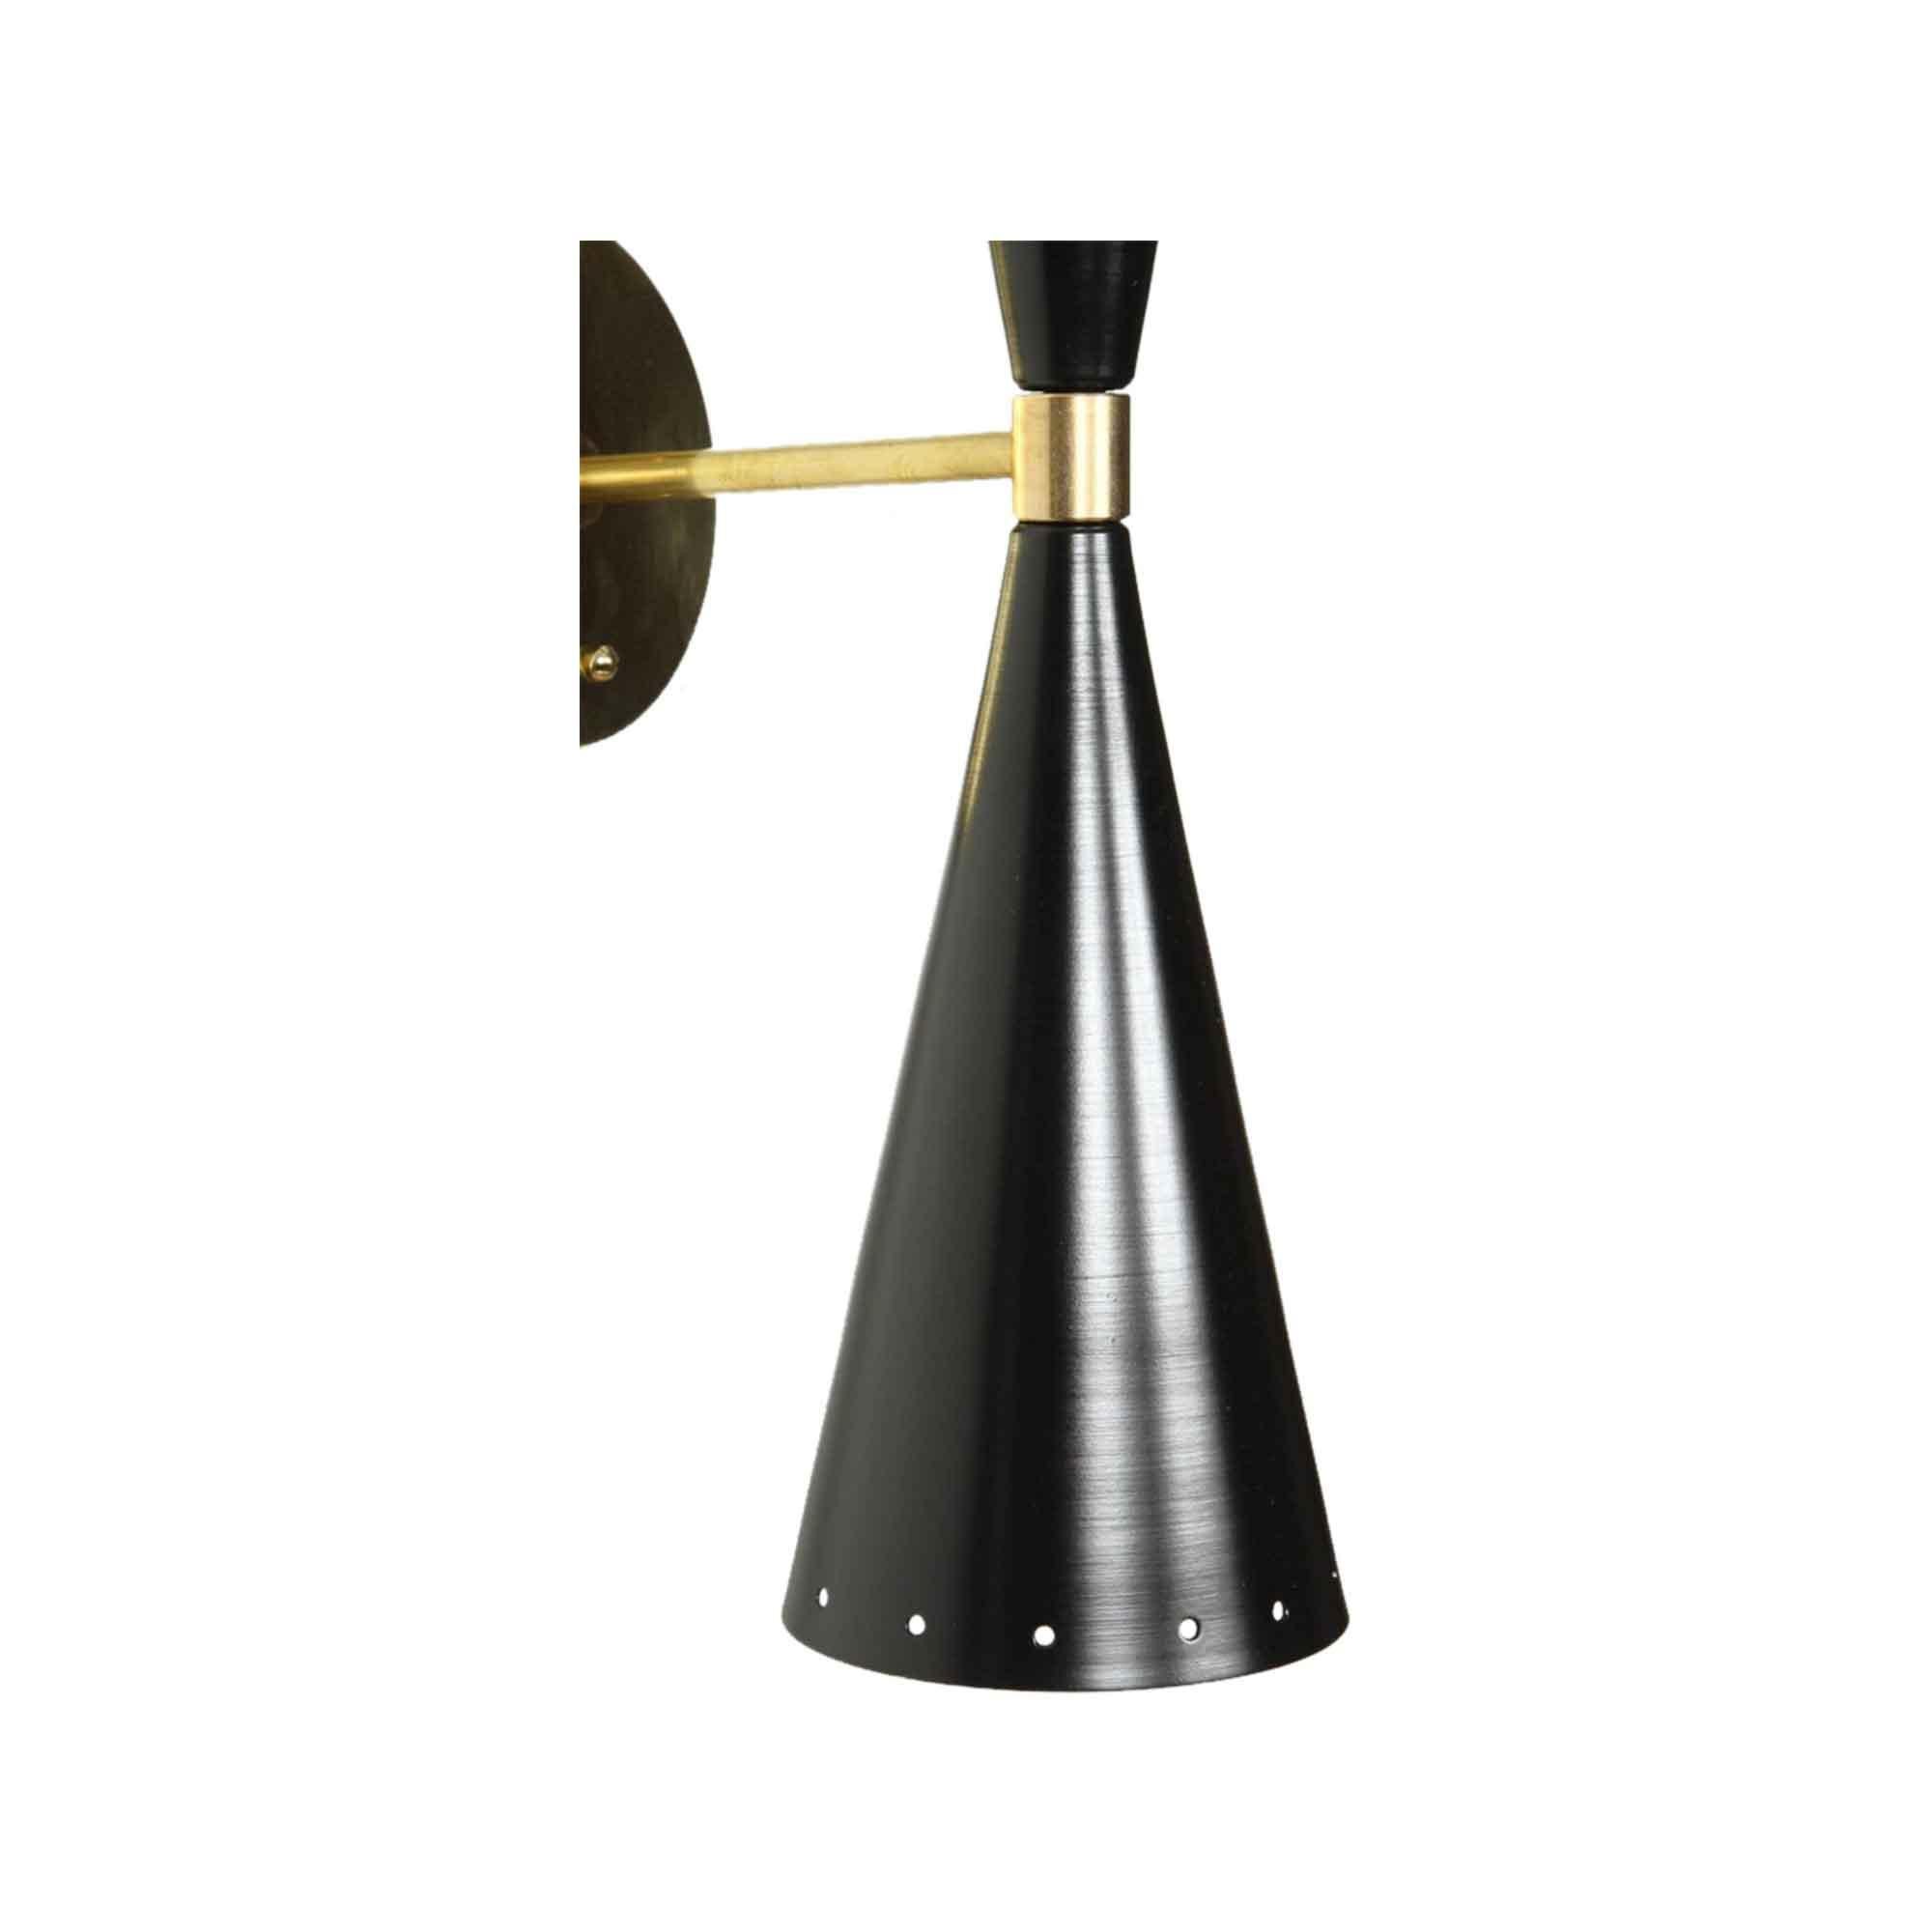 Black and brass double cone sconce by Lawson-Fenning. The double cone sconce features two tapered cones, in either black or white, with small perforations at both ends with a brass backplate and spacer. 

The Lawson-Fenning Collection is designed